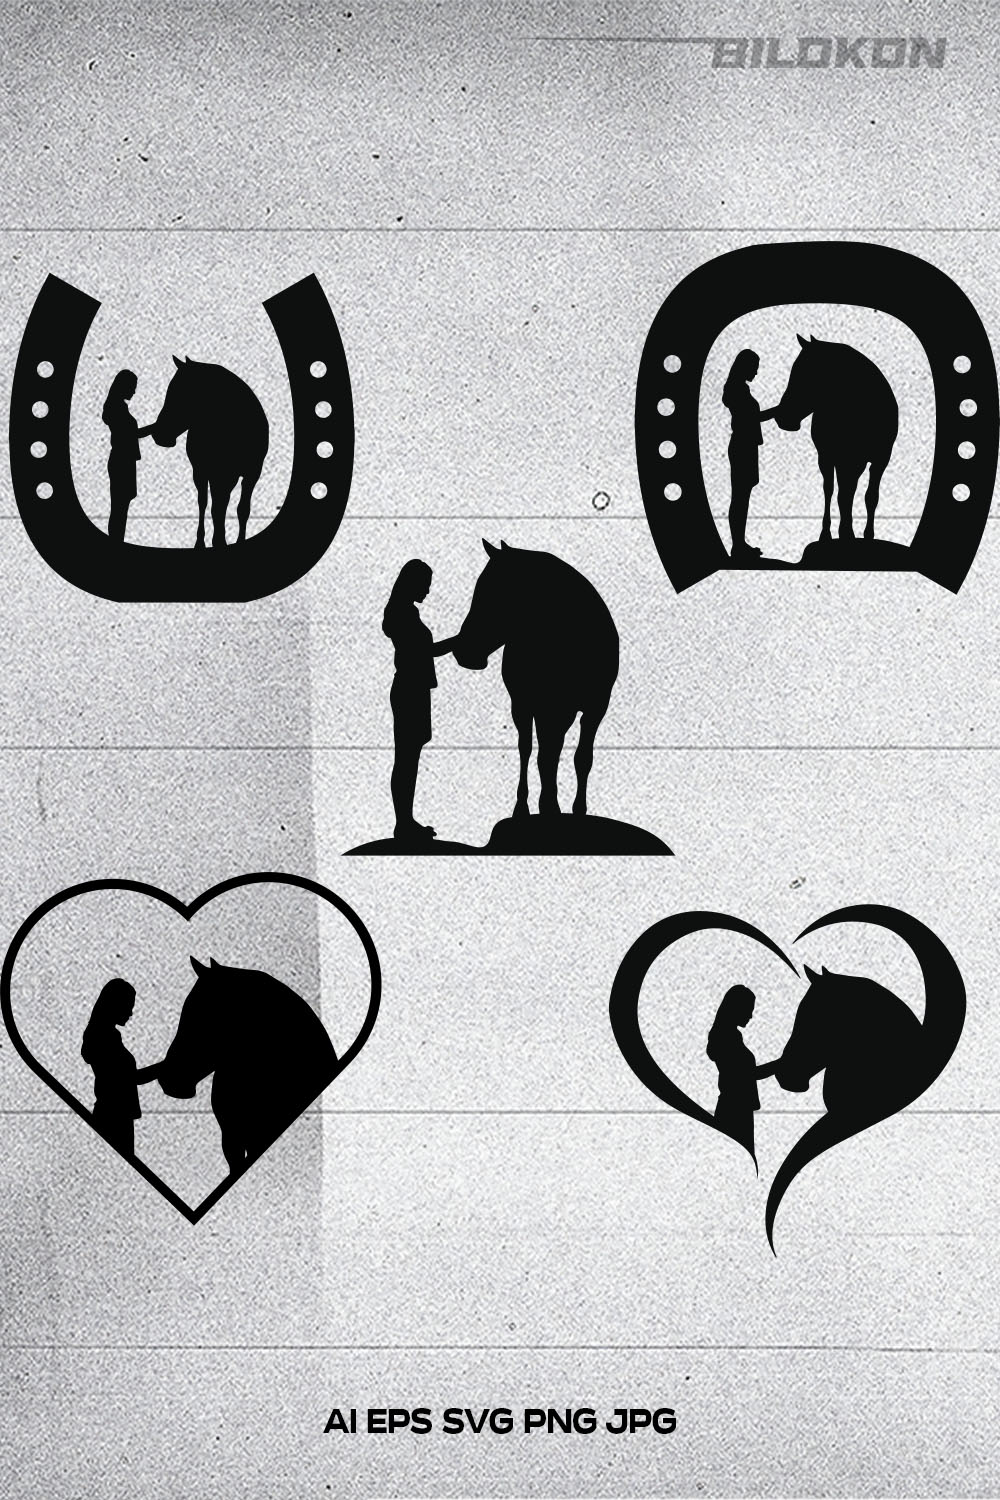 The silhouettes of horses and people are on a piece of paper.